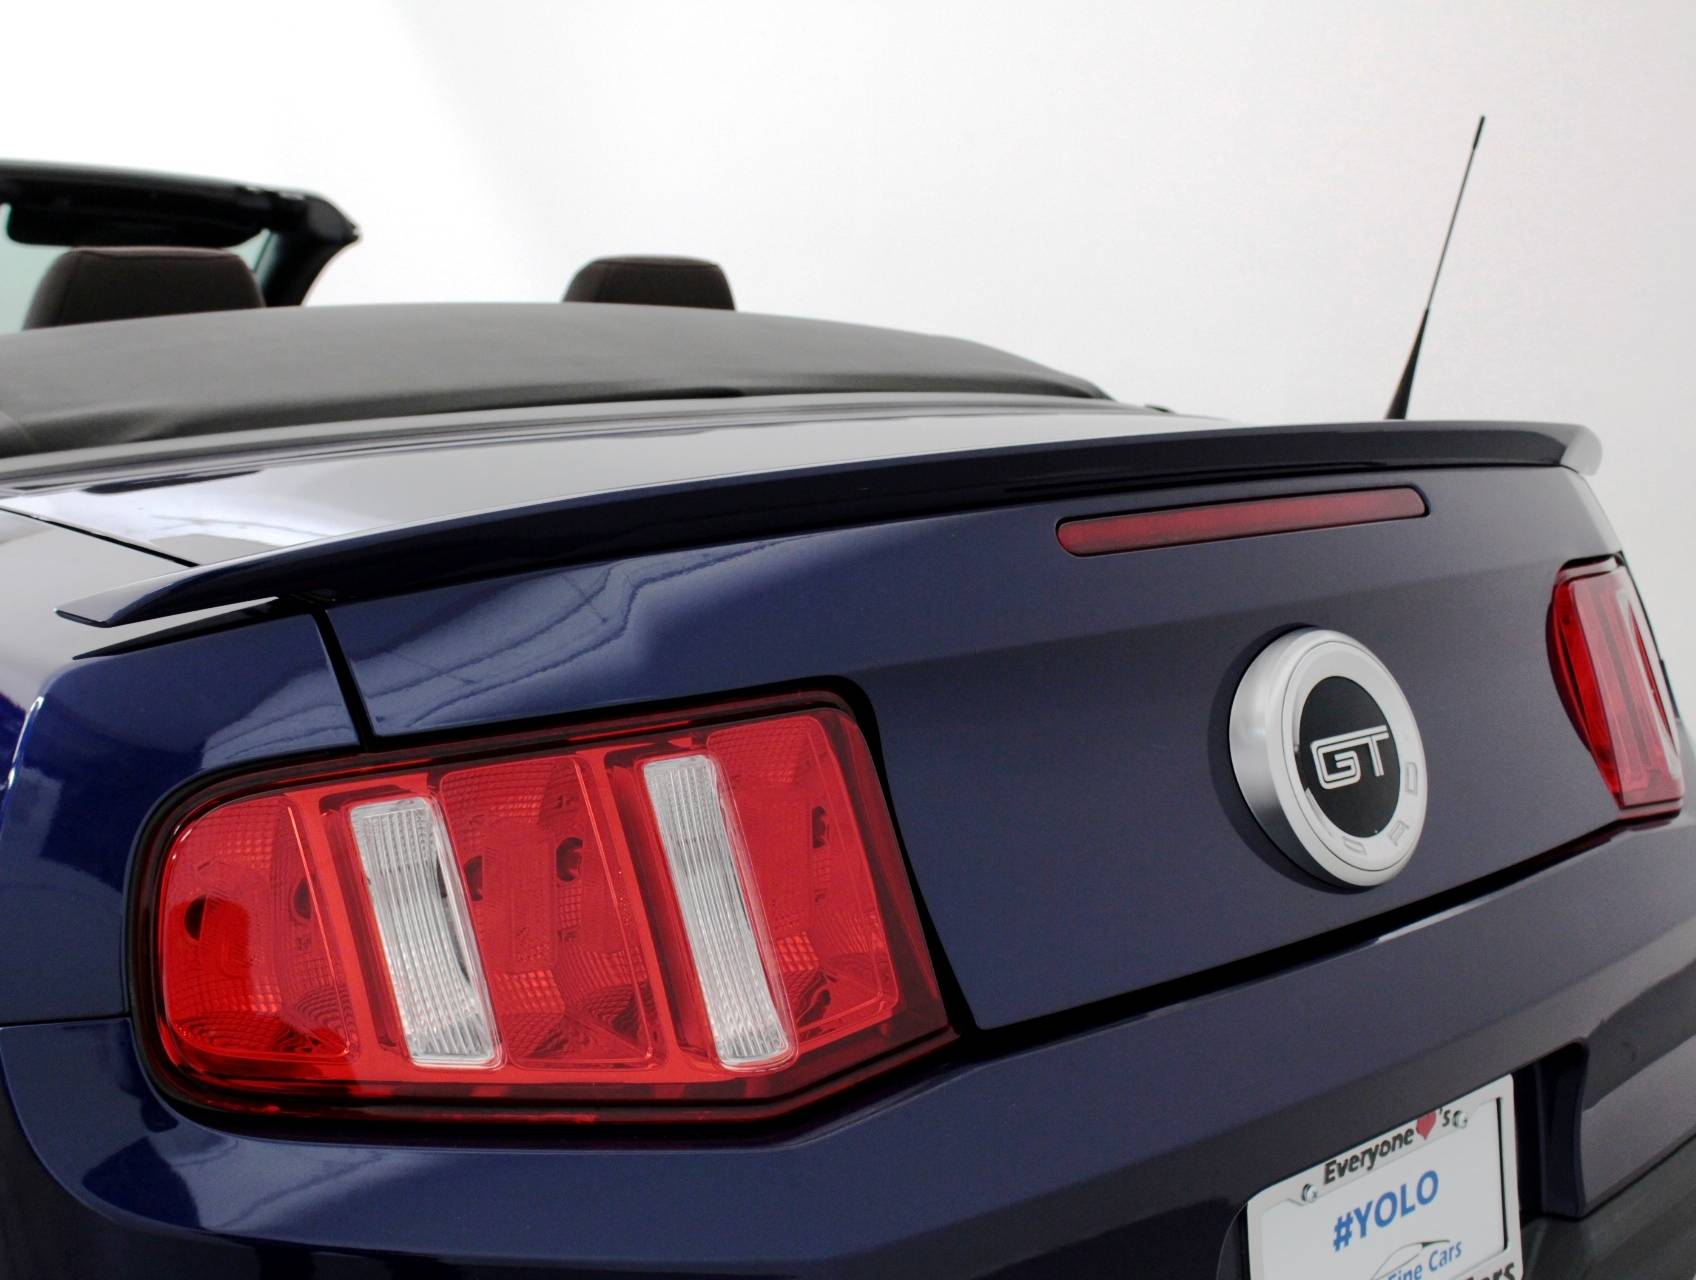 Florida Fine Cars - Used FORD MUSTANG 2011 MIAMI GT